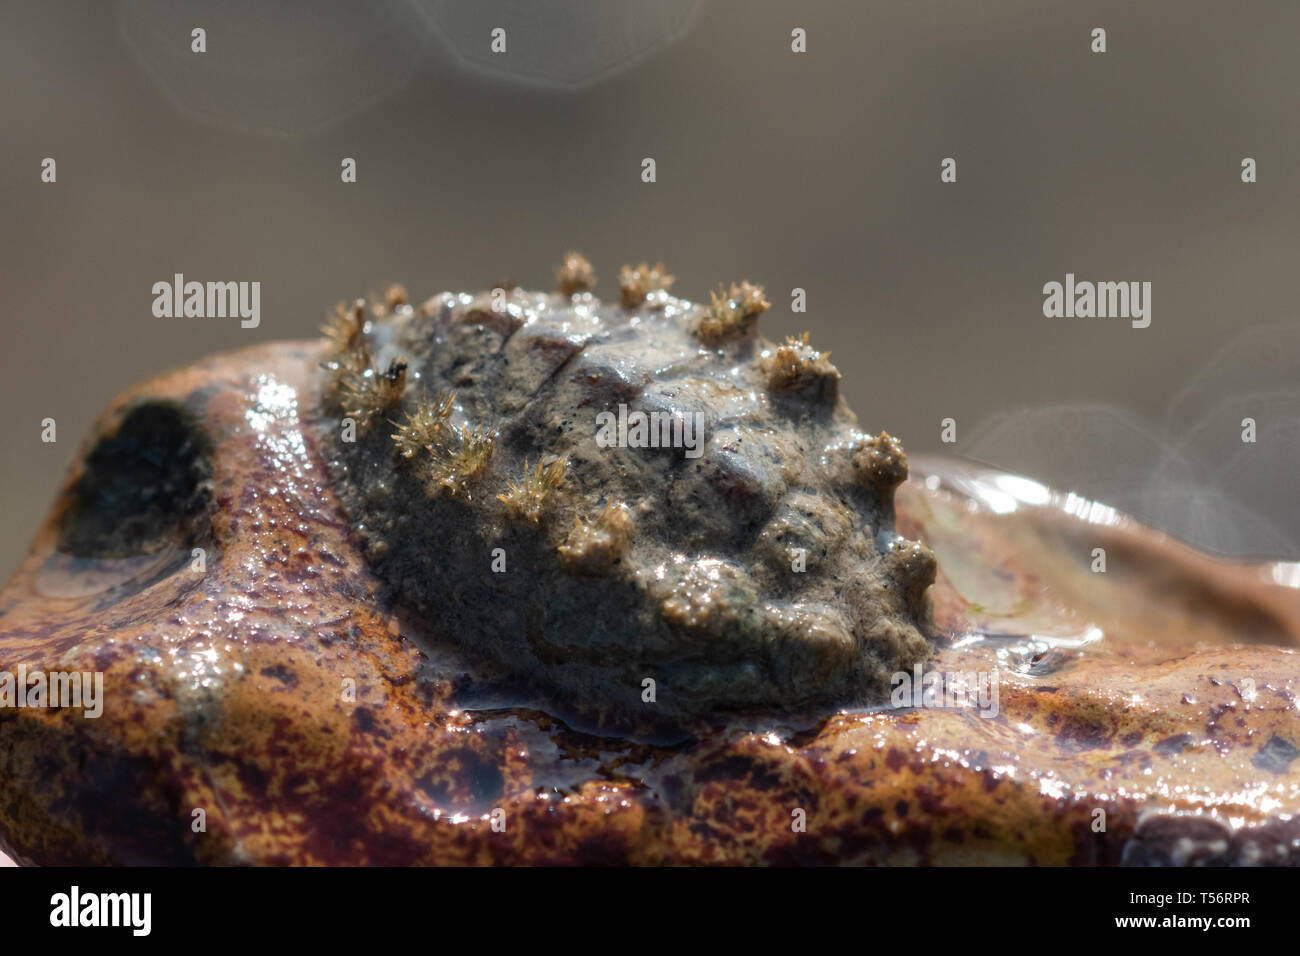 Close-up of a chiton (Acanthochitona sp.) attached to a rock, a species of marine wildlife, UK Stock Photo